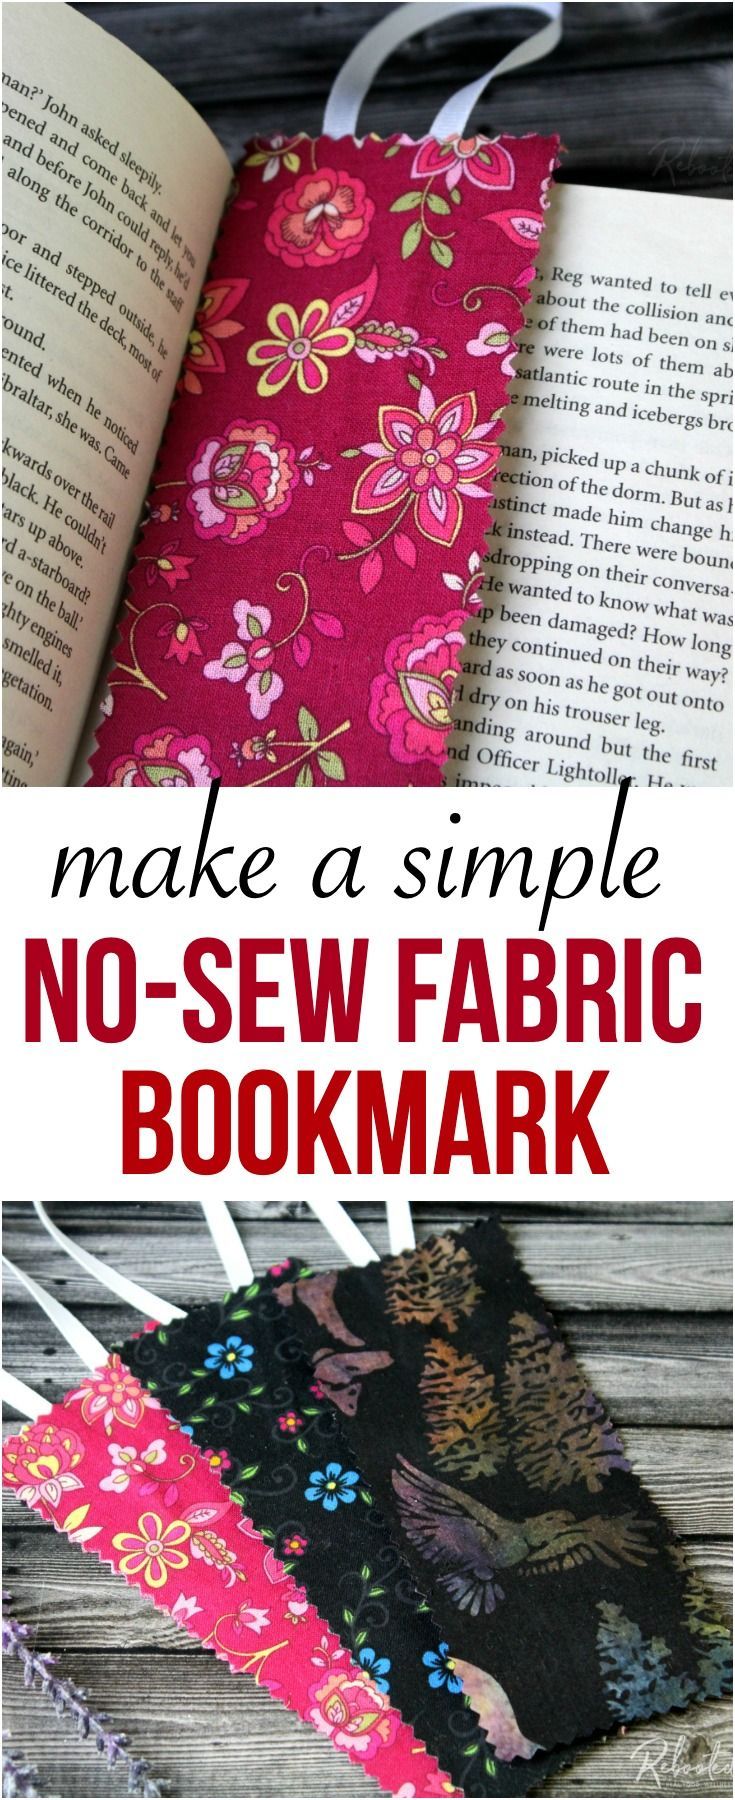 19 fabric crafts things to make ideas